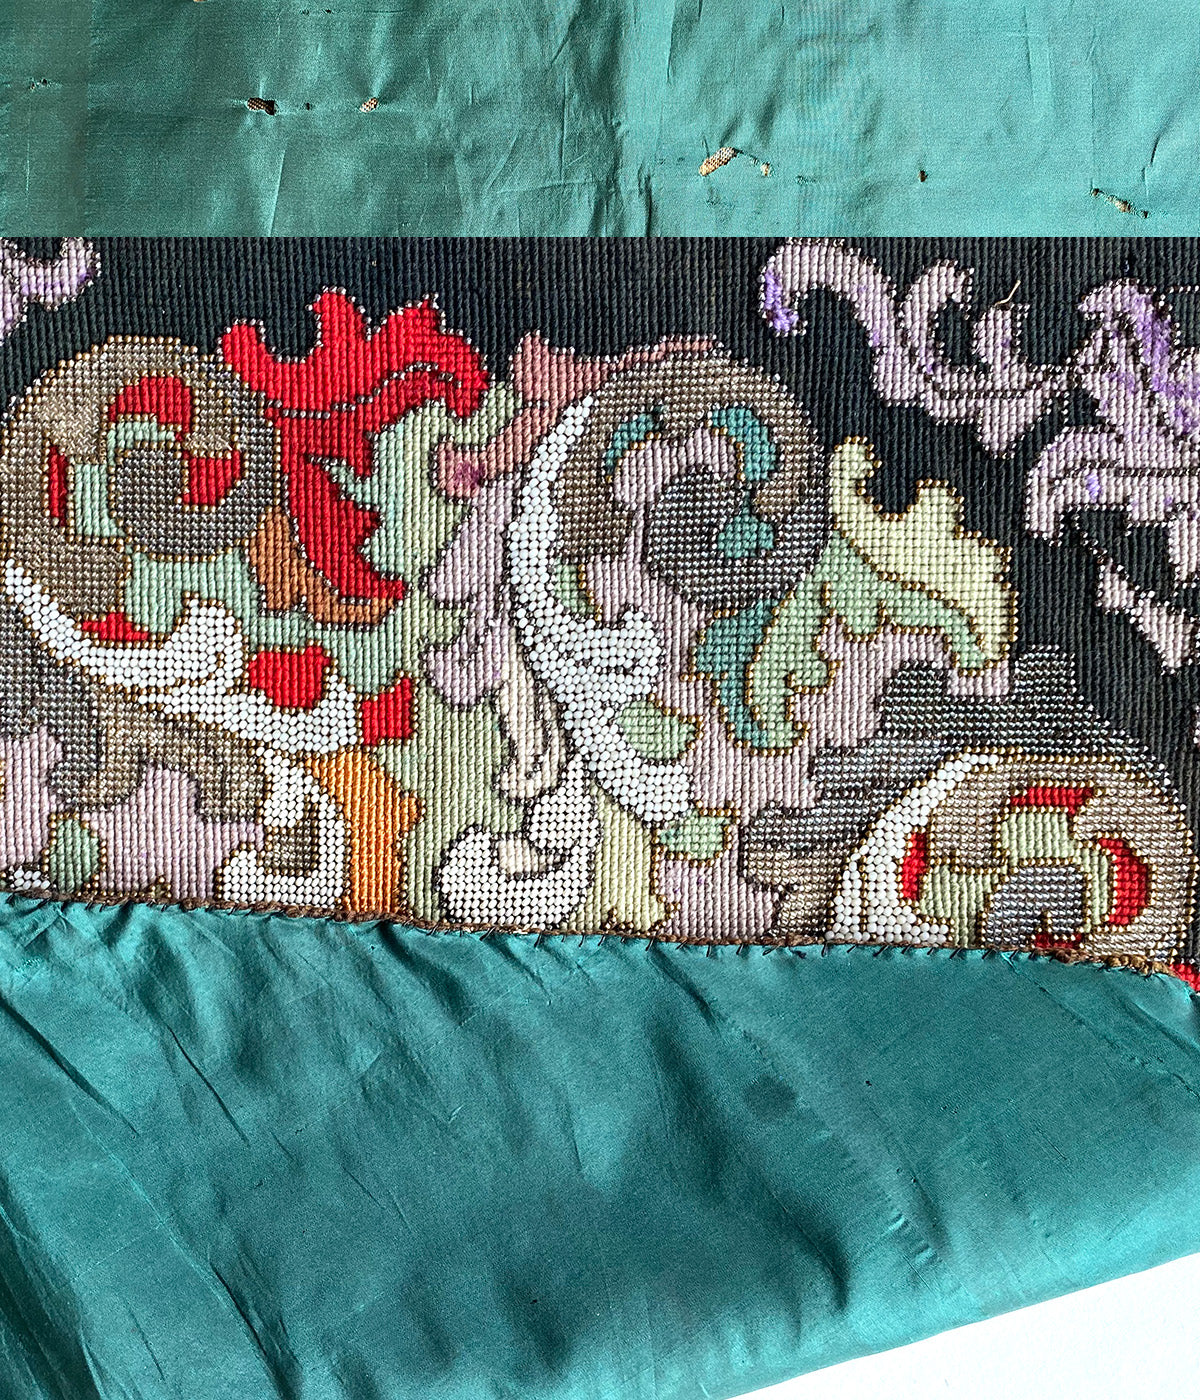 Superb Antique French Beadwork Screen, 18" x 16" in Silk Needlepoint, For Pillow Top